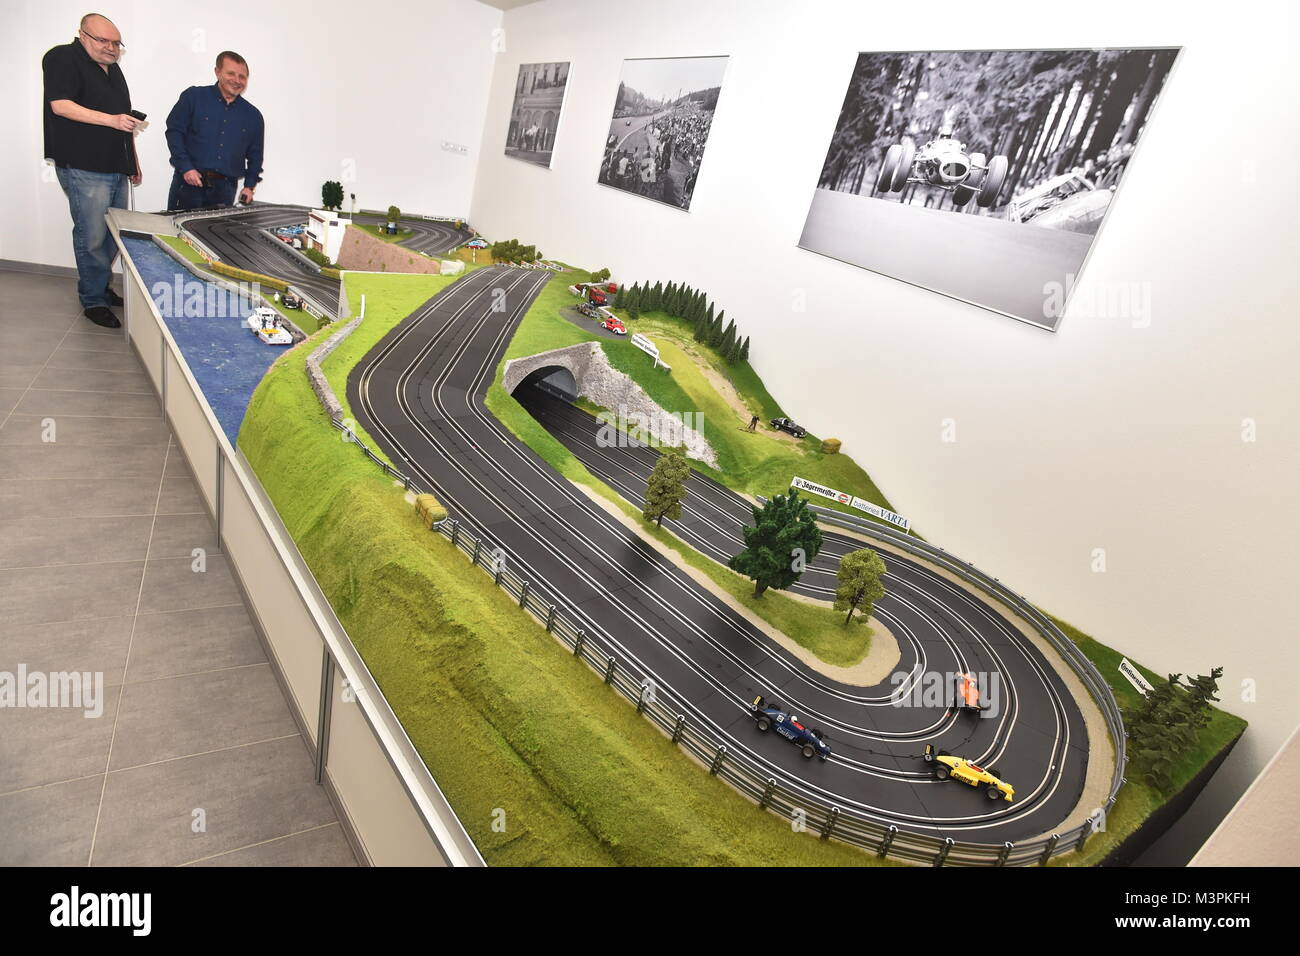 Dolni Vltavice, Czech Republic. 12th Feb, 2018. The Formula One slot car is seen at the Hotel Relax in Dolni Vltavice, near Lipno, Czech Republic, on February 12, 2018. The slot car takes 18 square meters. Credit: Vaclav Pancer/CTK Photo/Alamy Live News Stock Photo